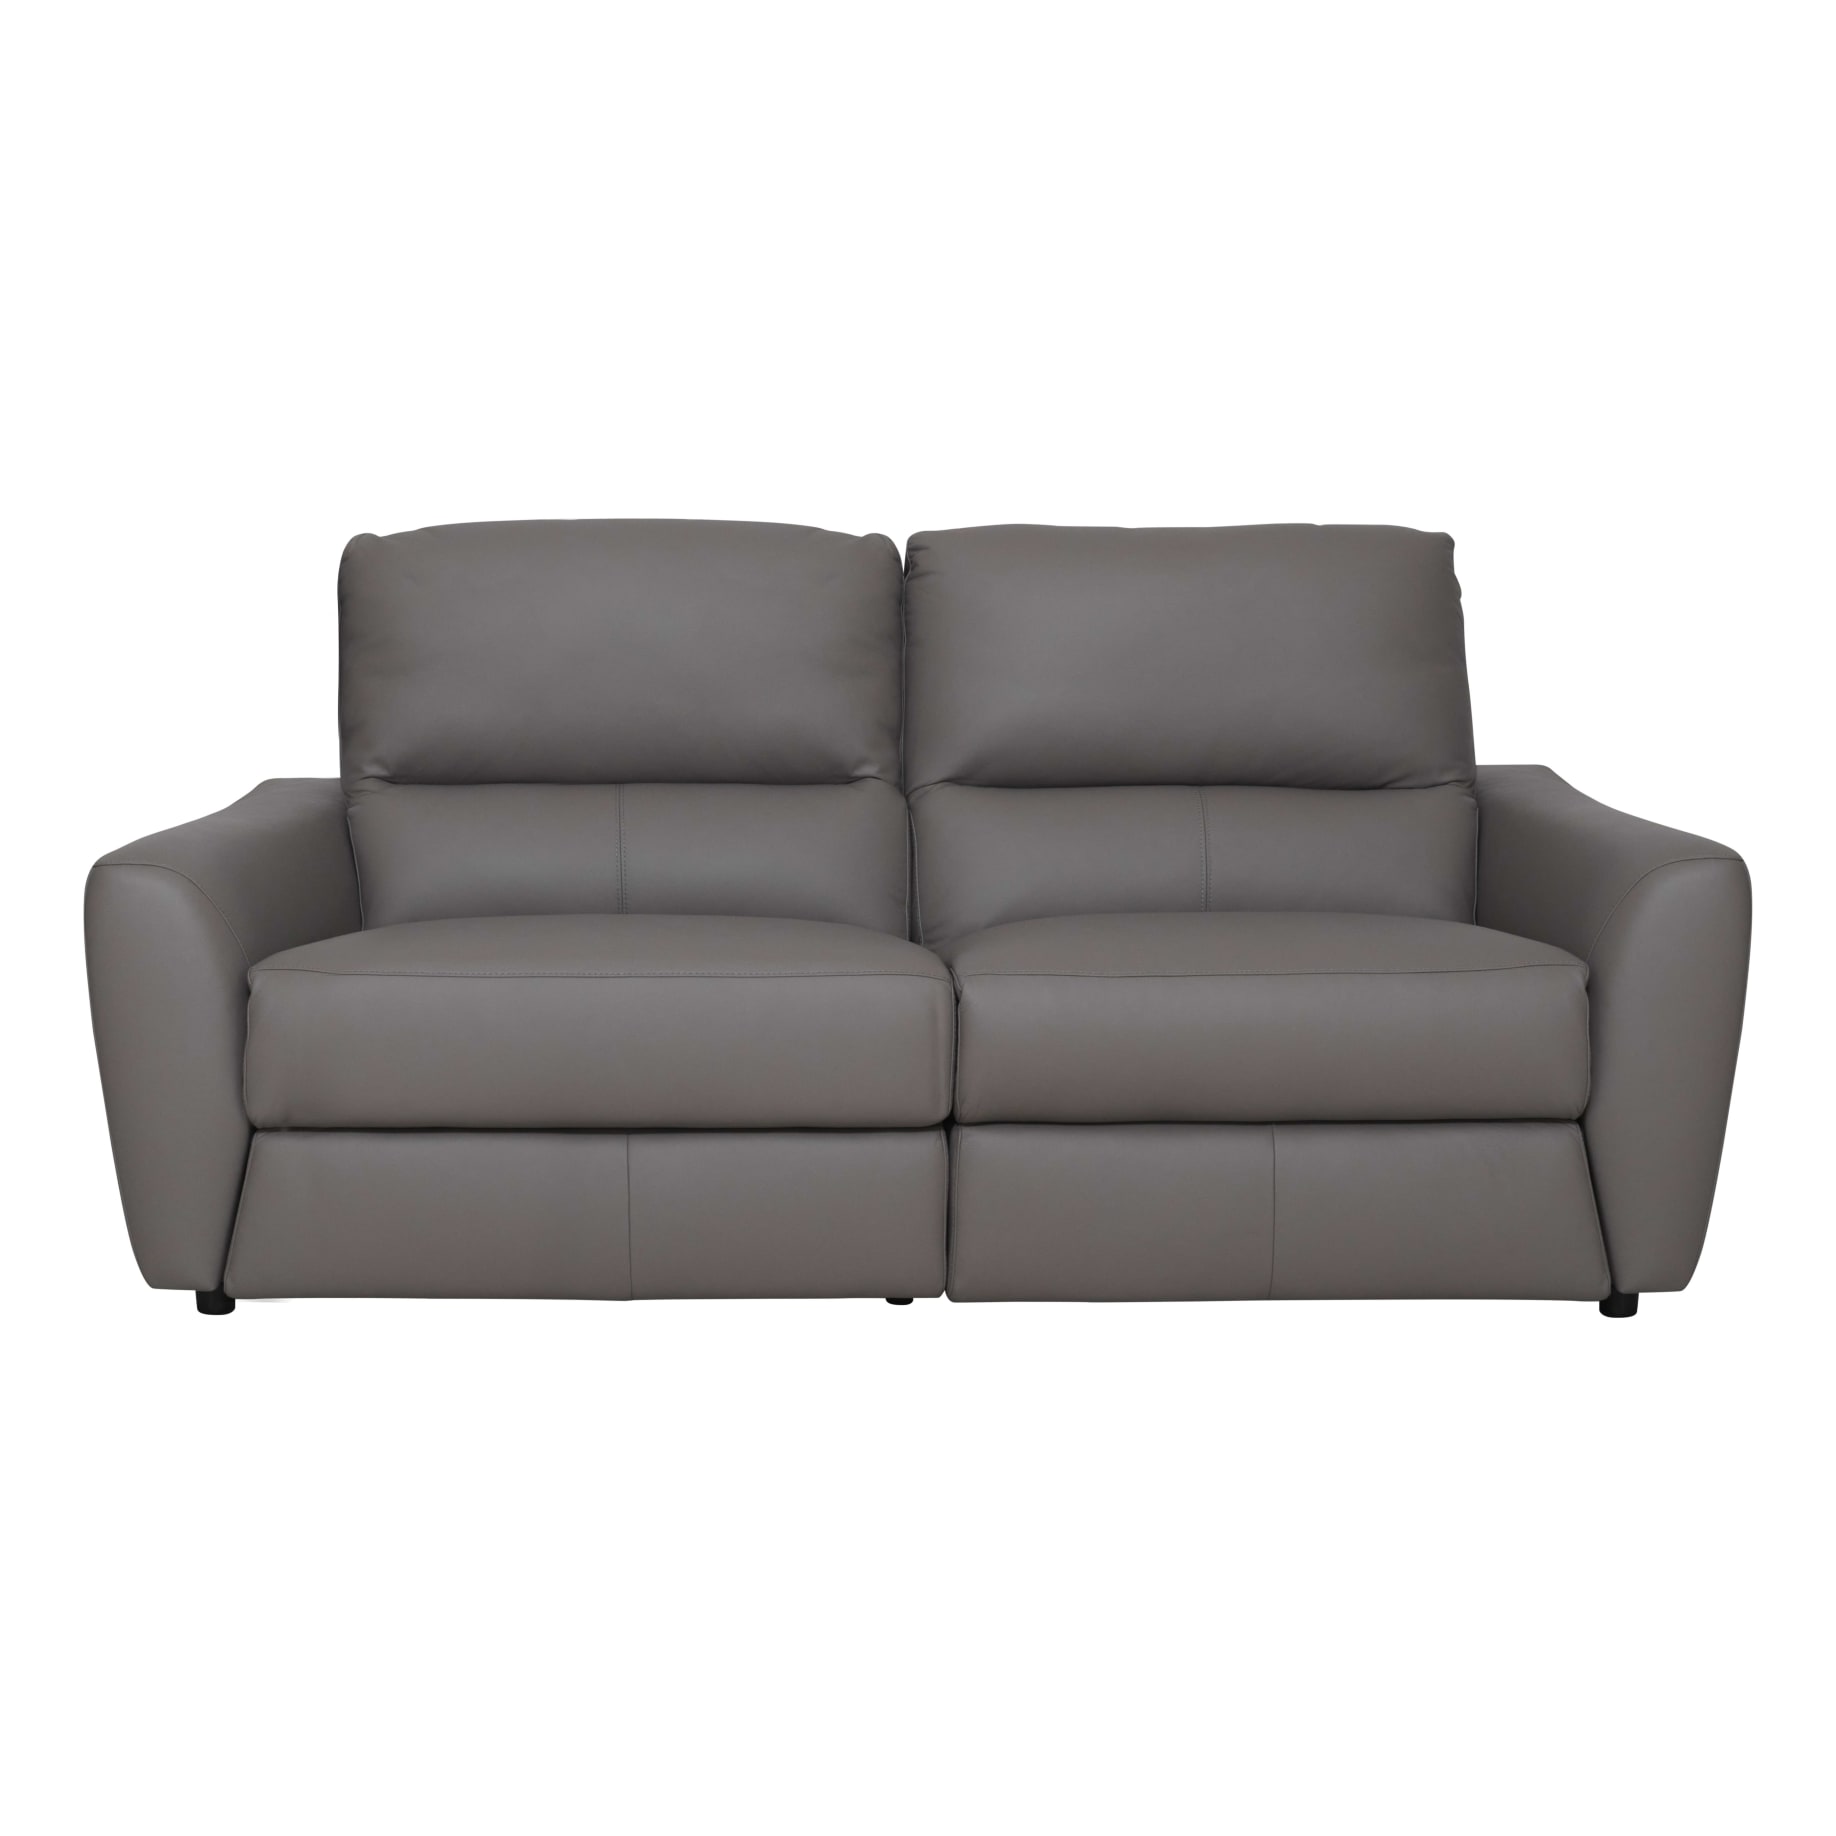 Portland 2 Seater Recliner in Leather Grey